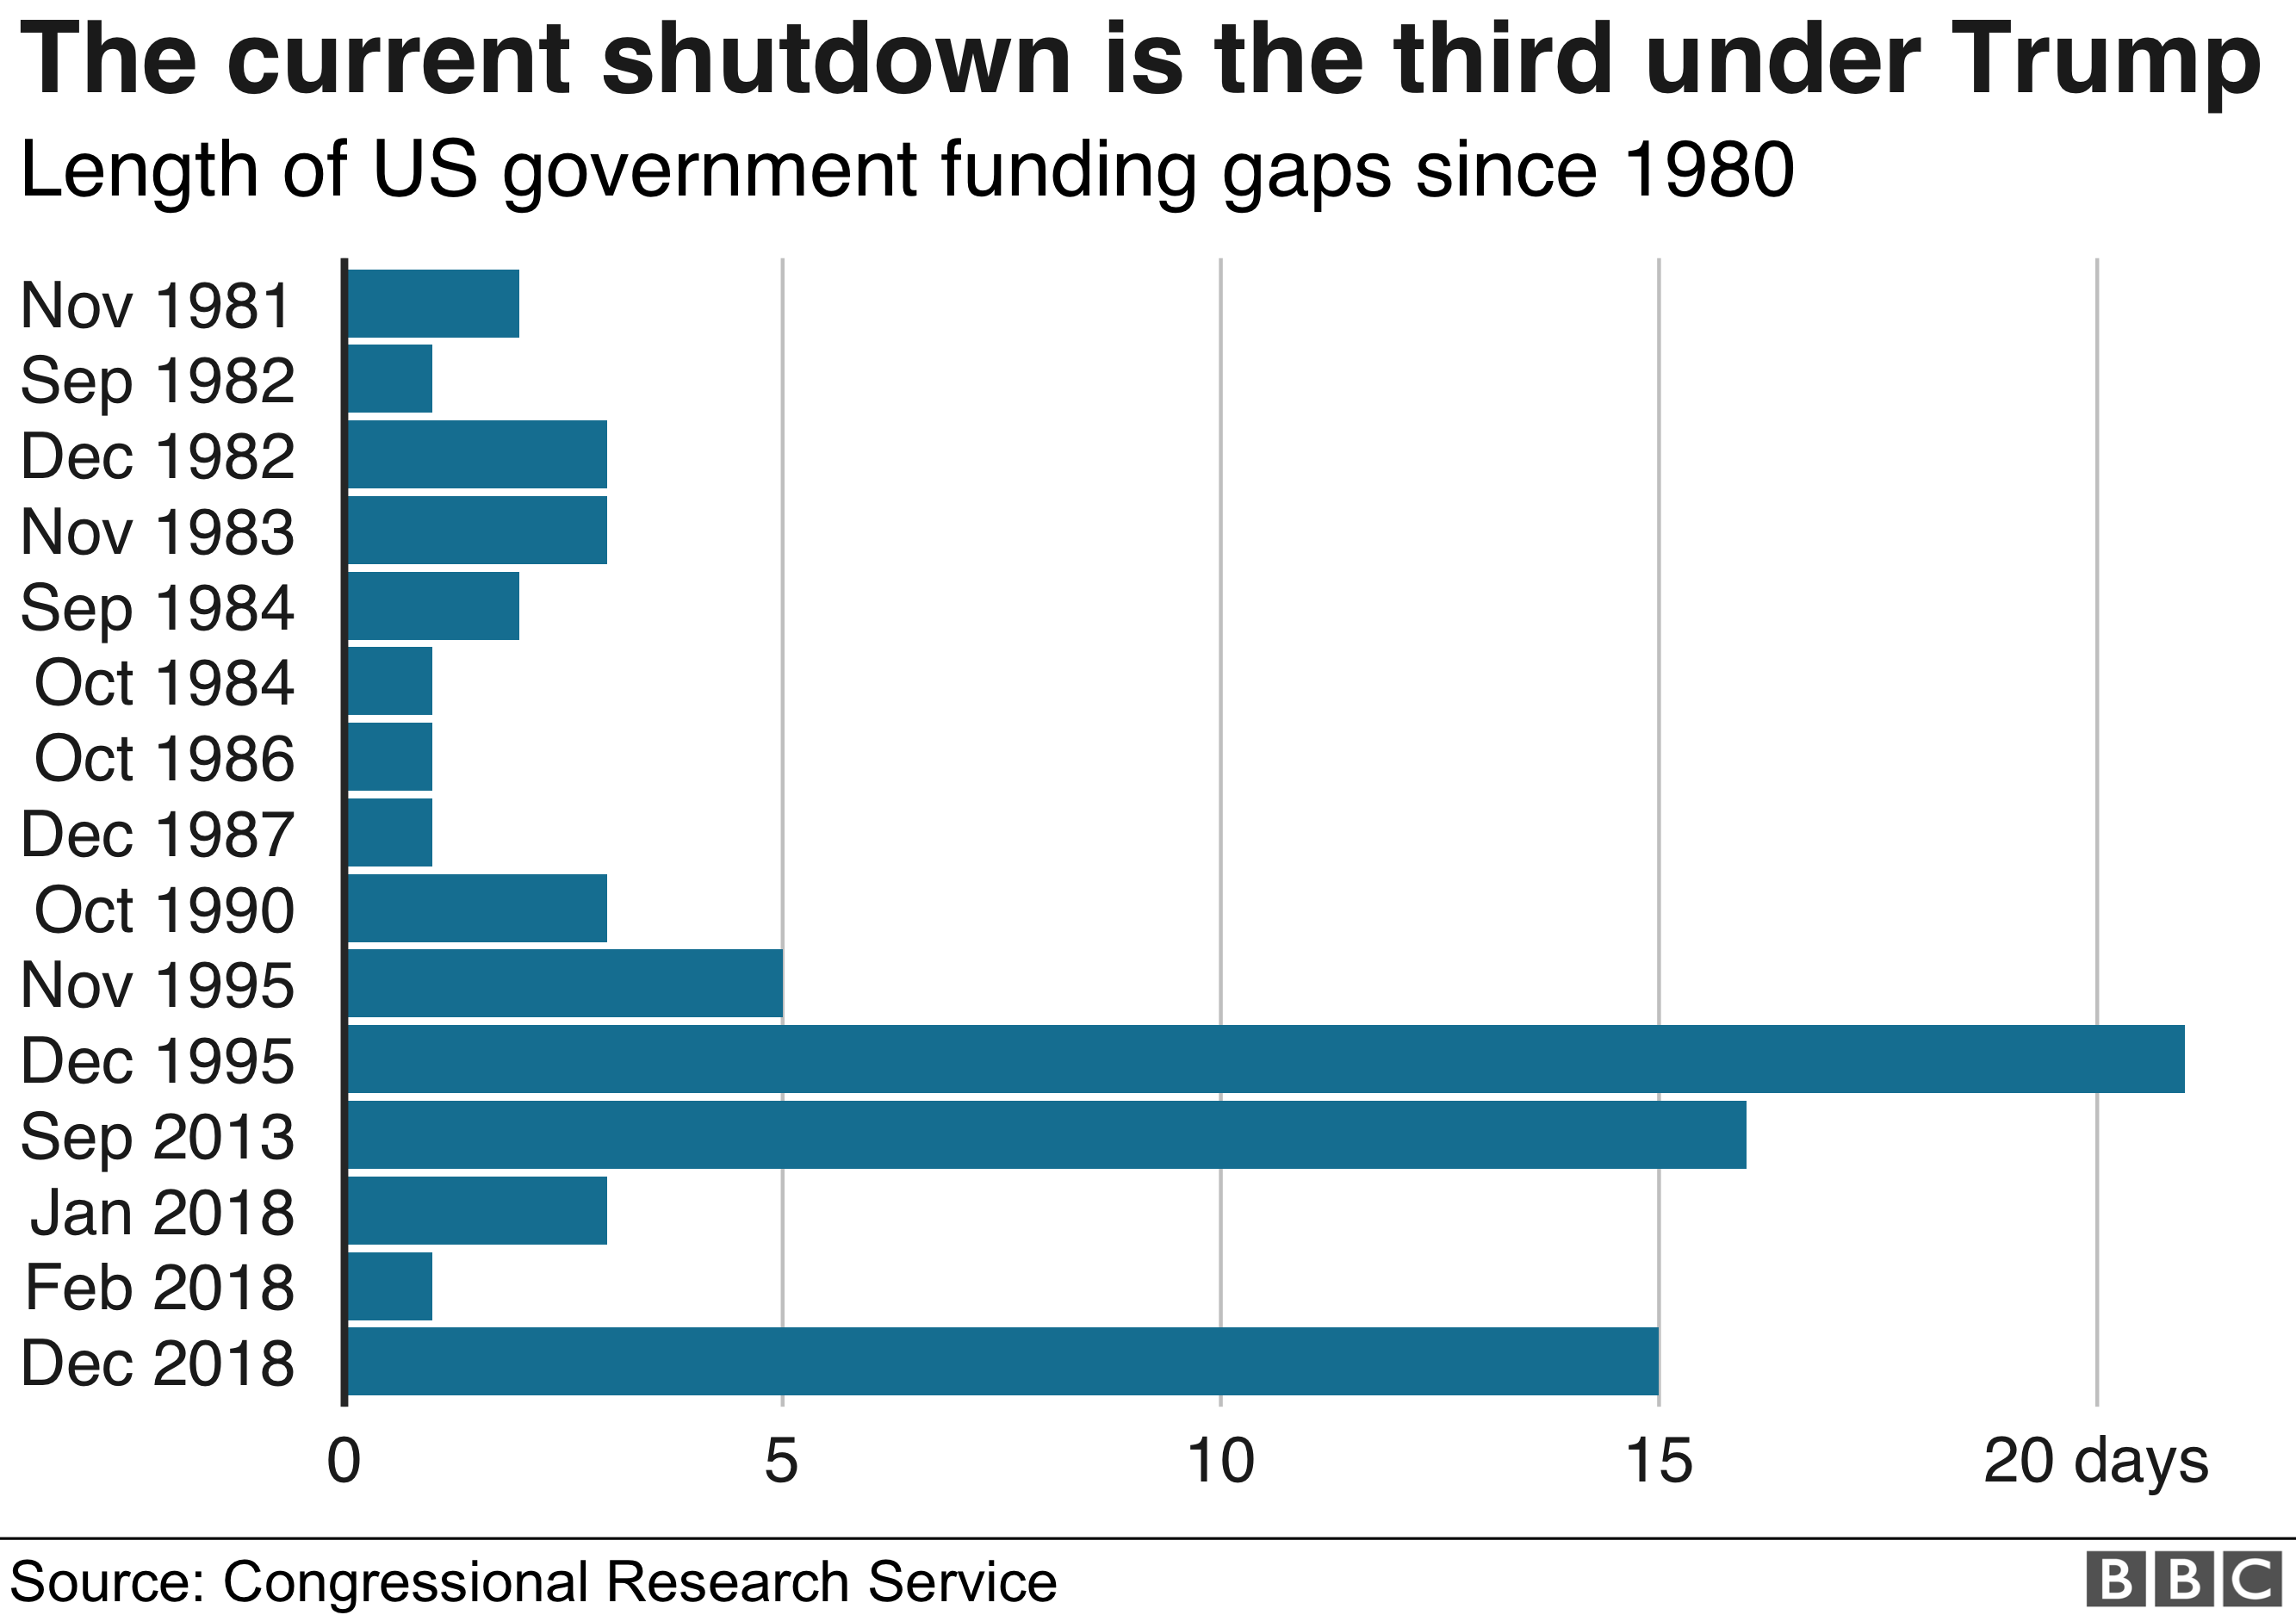 graphic showing length of shutdowns since 1980